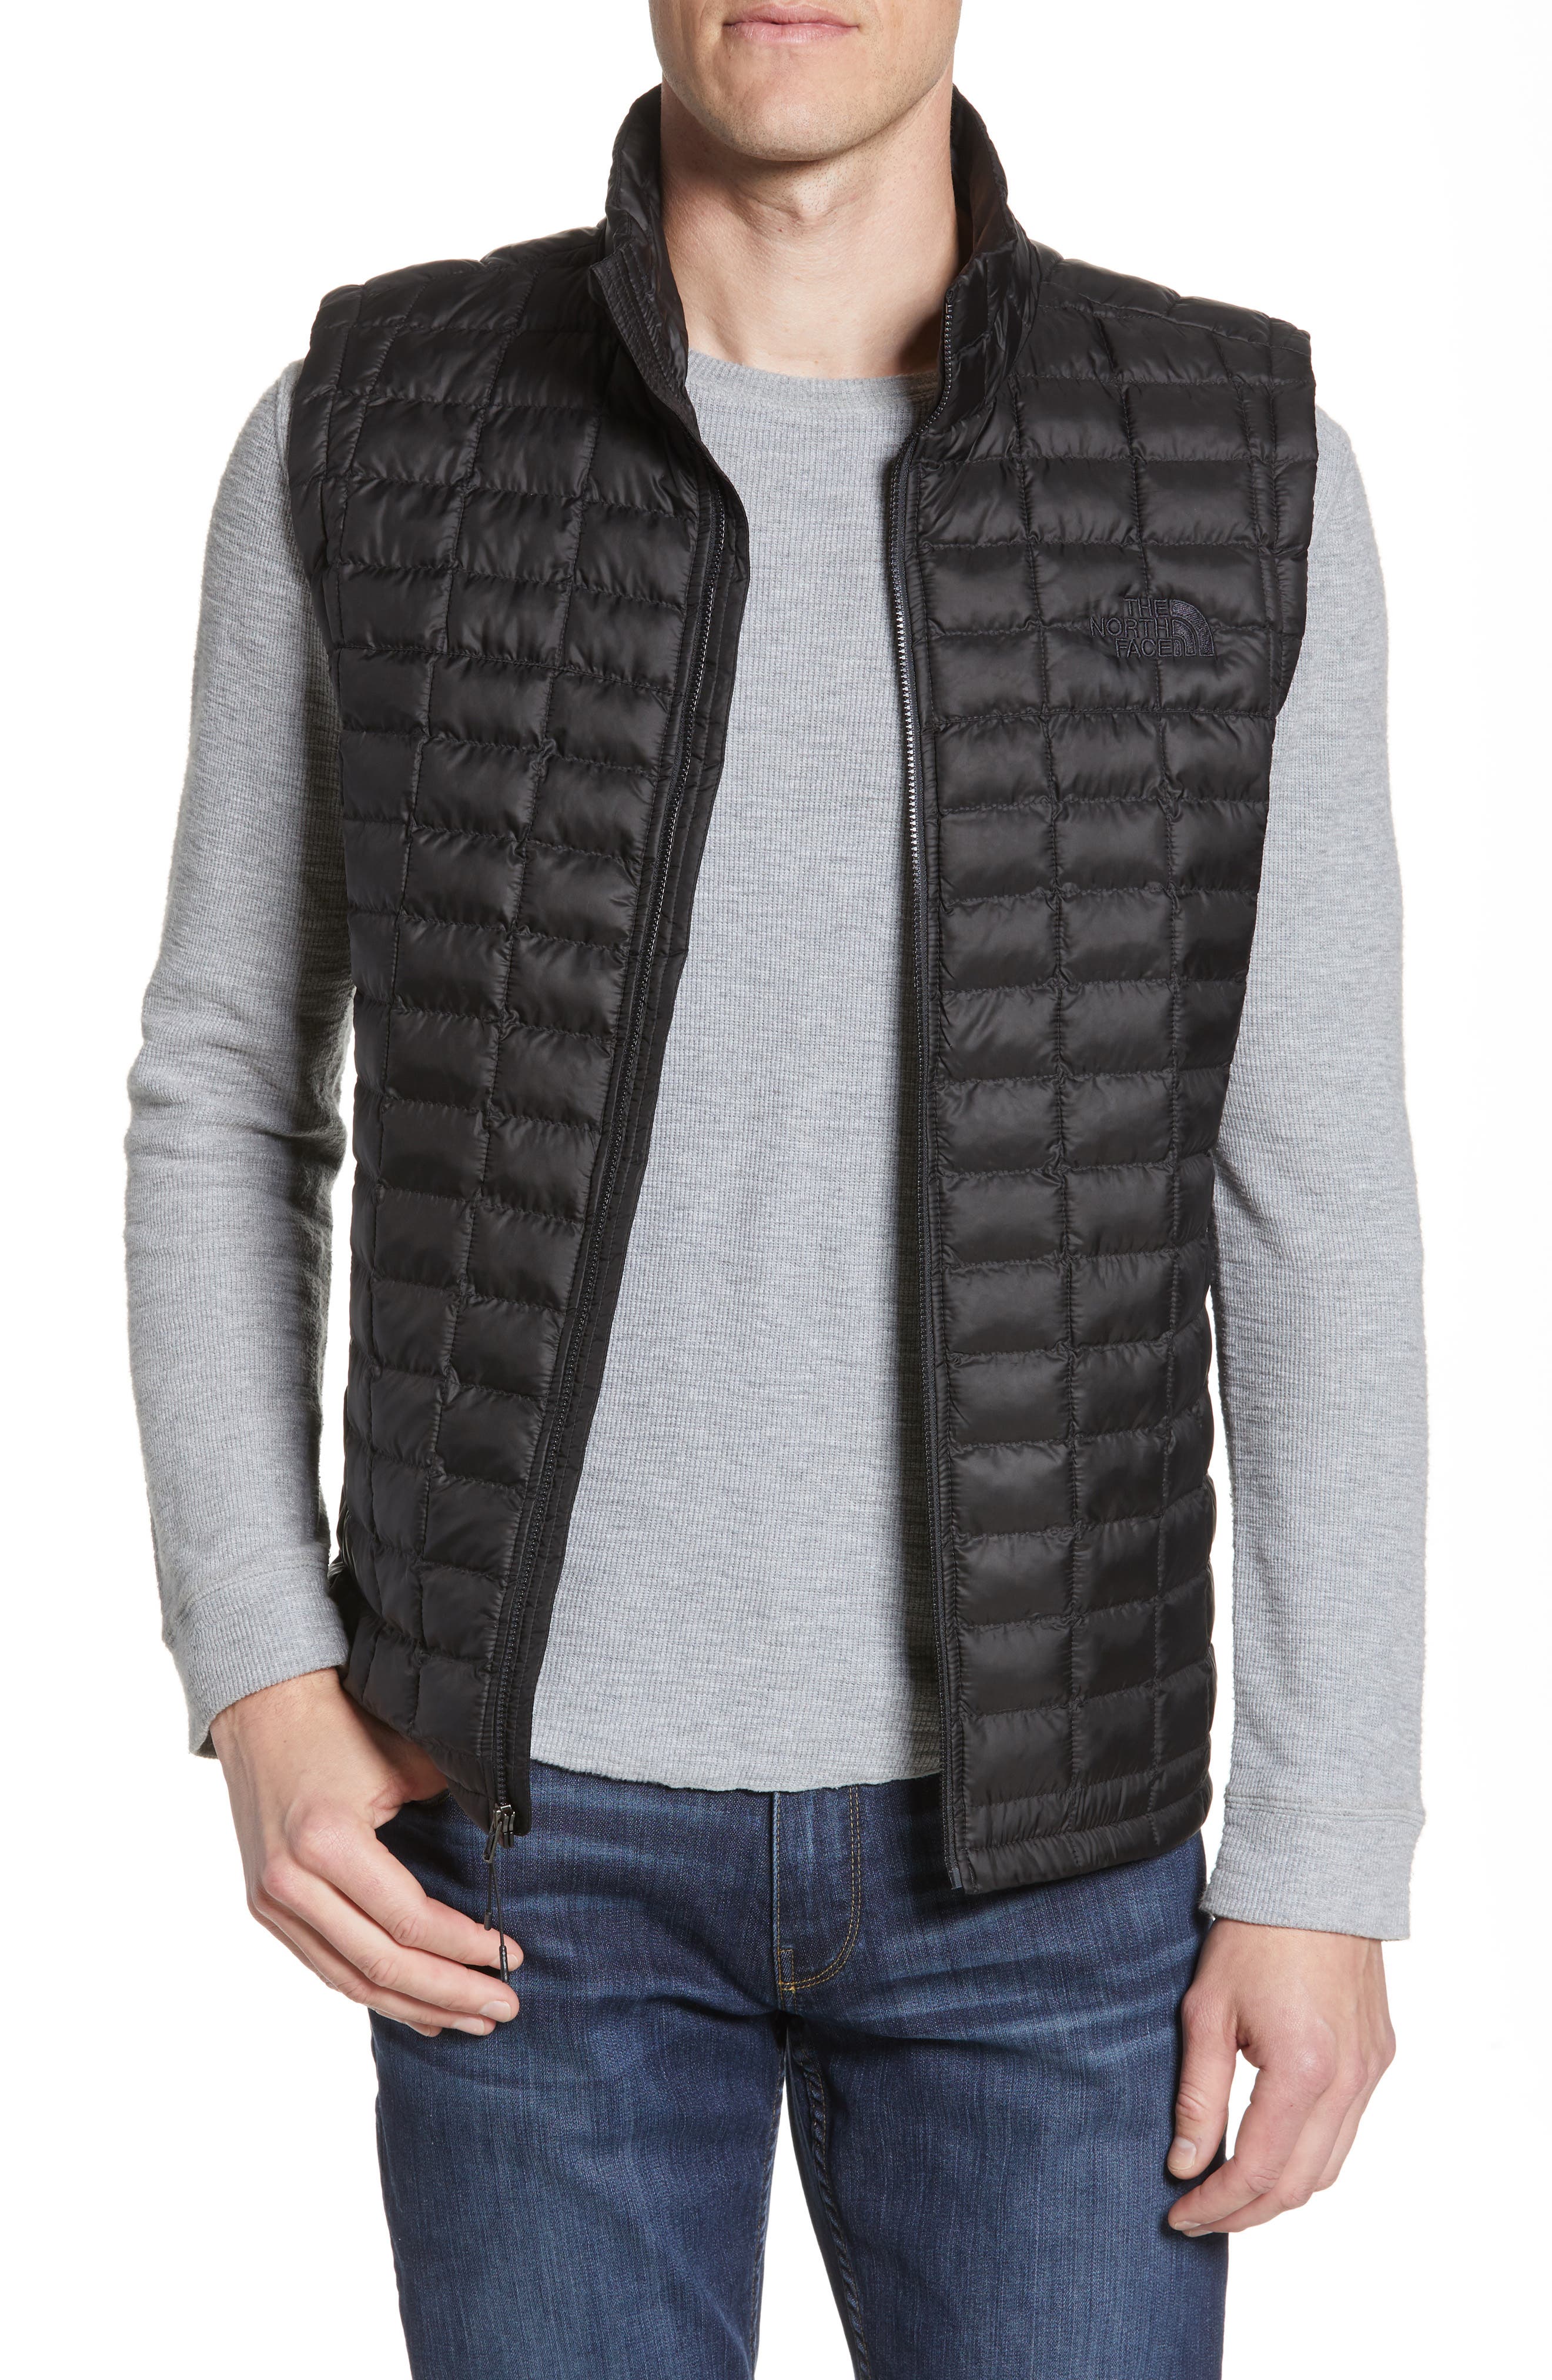 thermoball vest